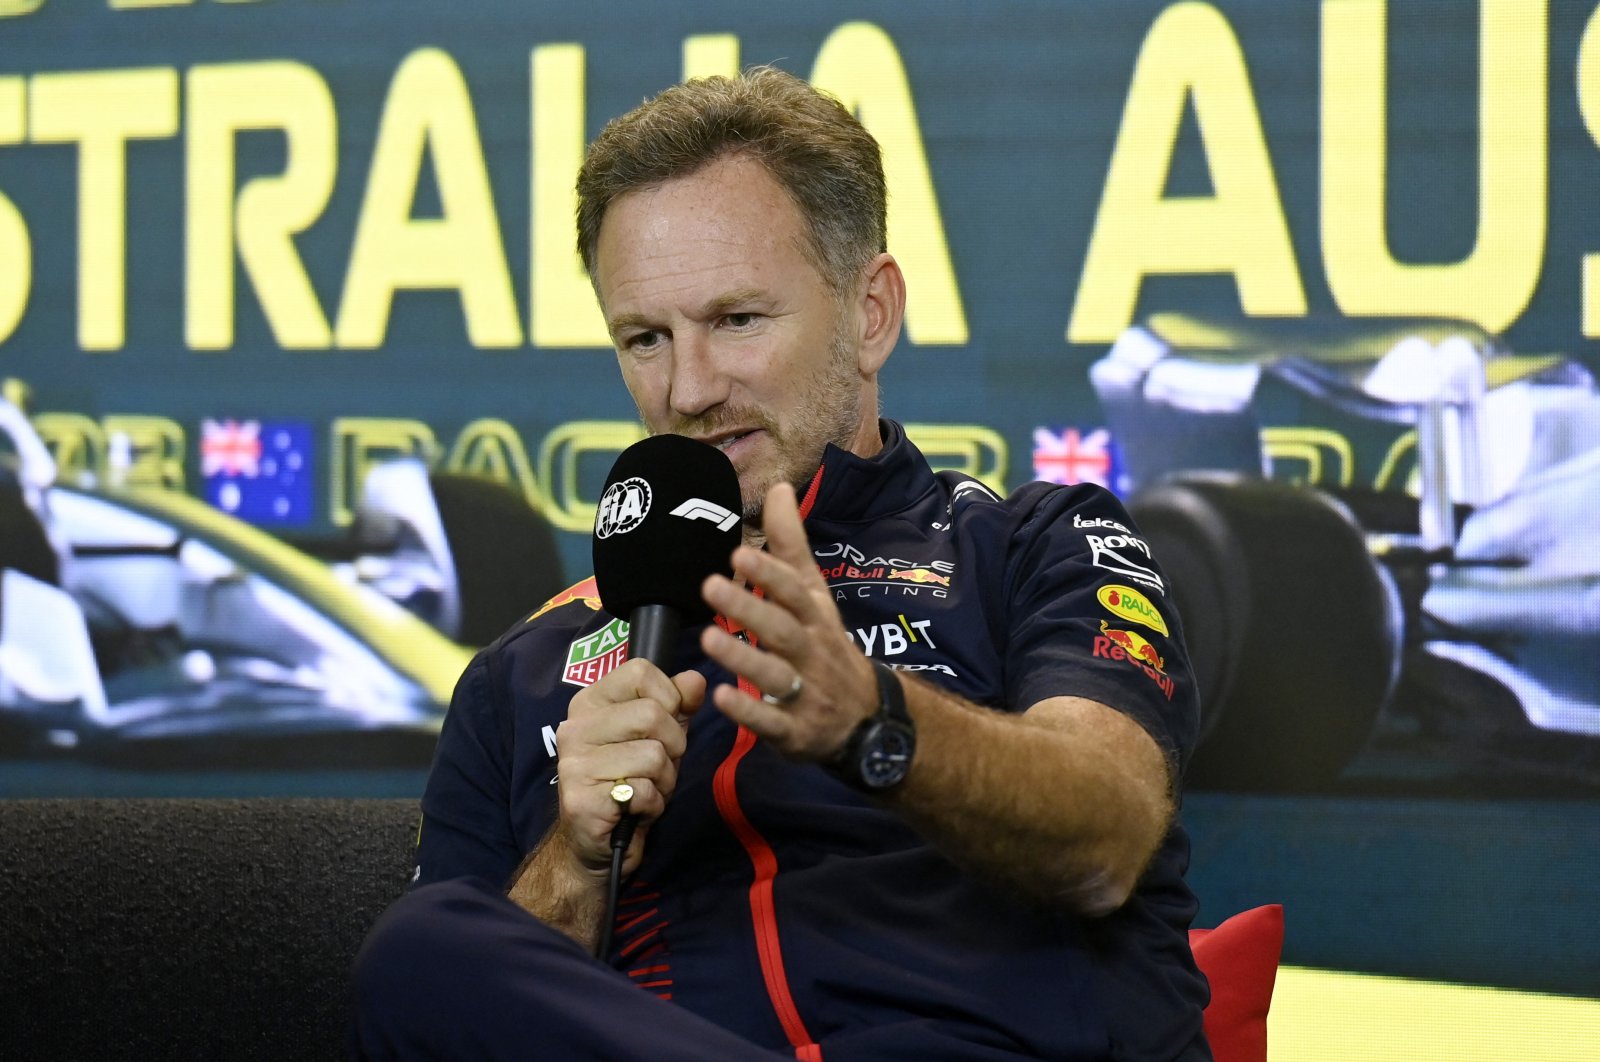 Red Bull team principal Christian Horner during the press conference ahead of Australian Grand Prix at the Melbourne Grand Prix Circuit, Melbourne, Australia, March 31, 2023. (Reuters Photo)